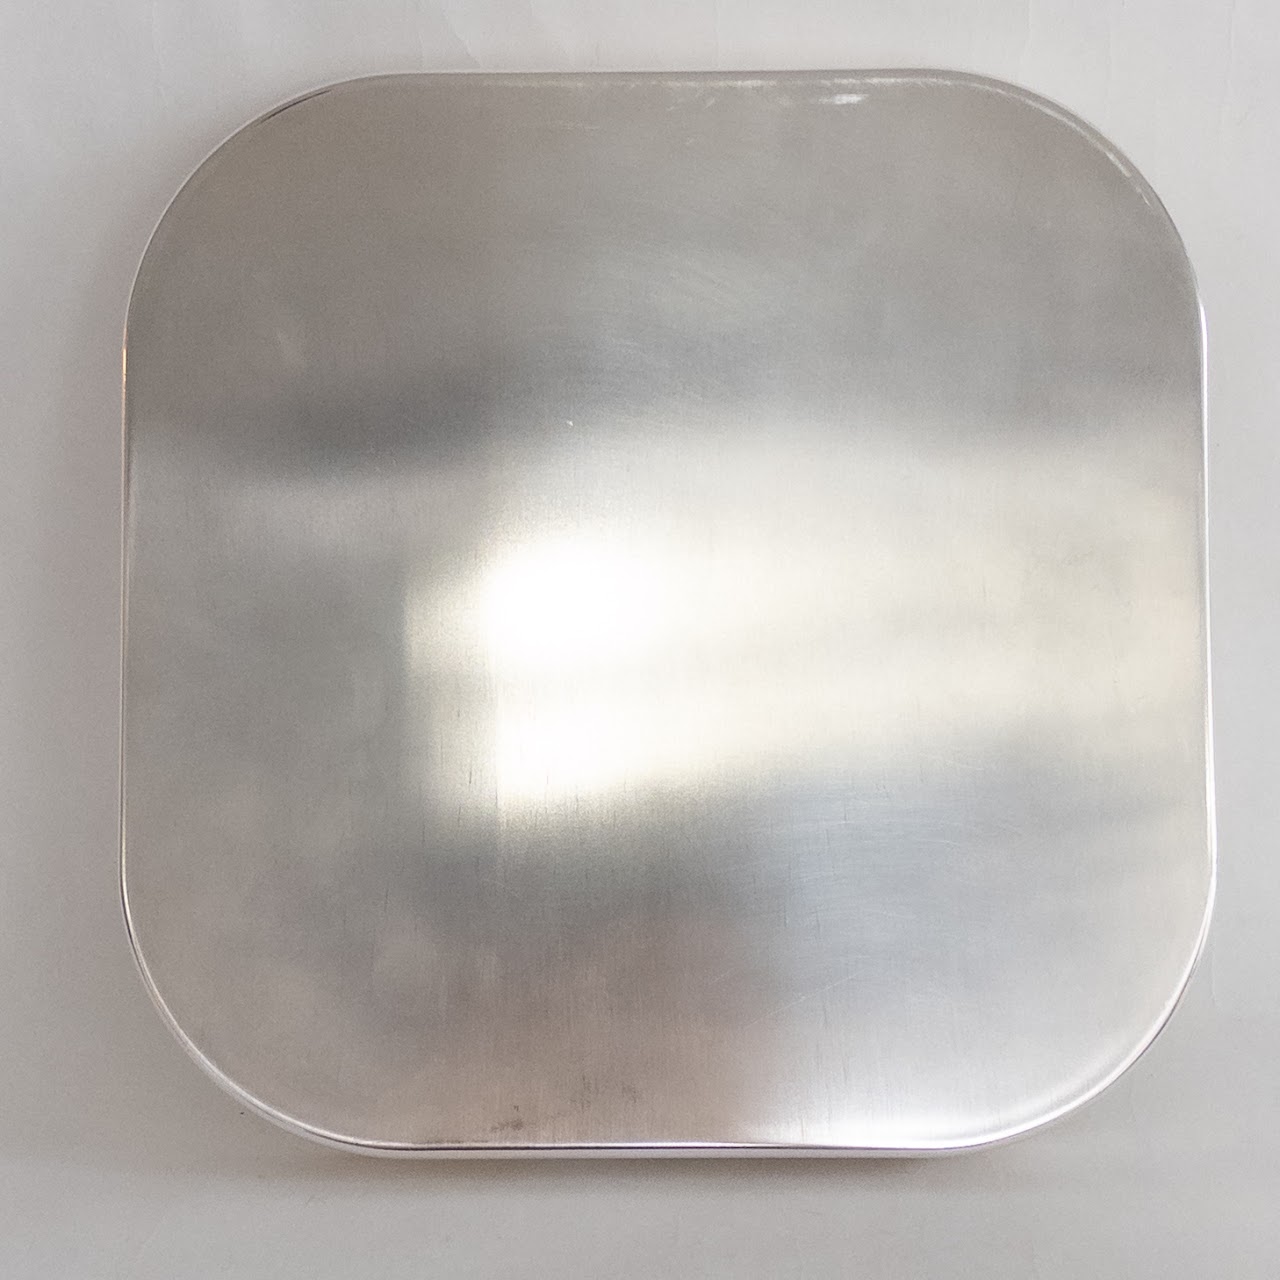 Christofle K+T Collection Silver-Plated Square Tray